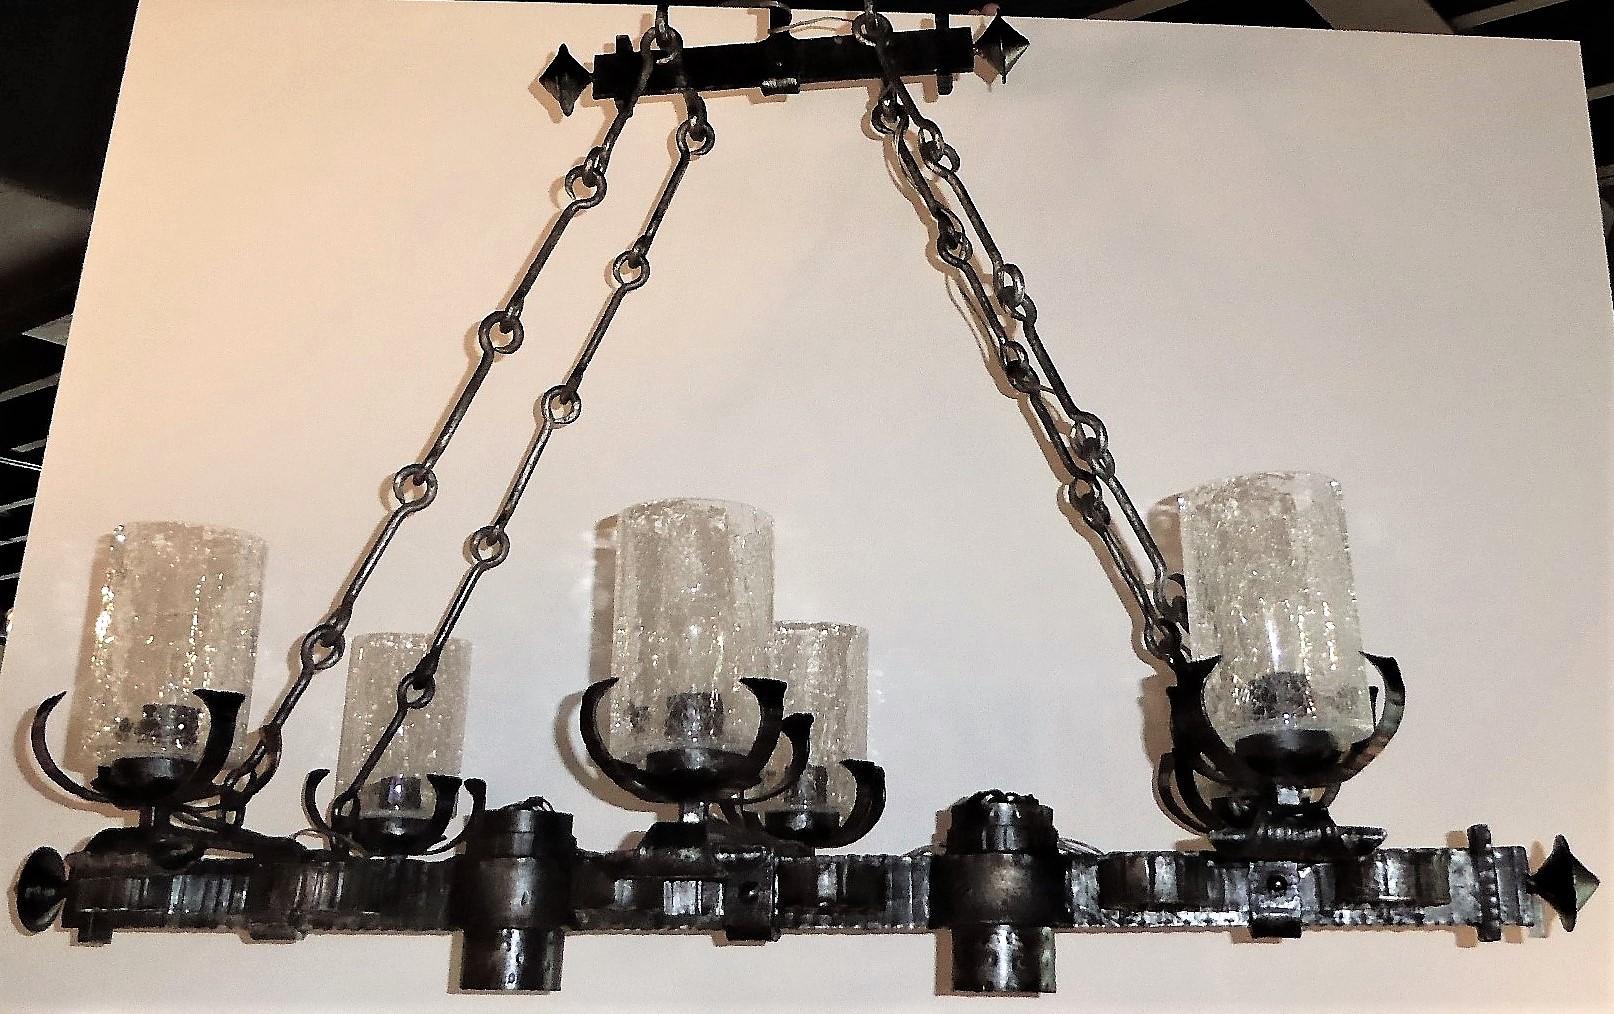 REDUCED FROM $1,550....From the 1960s, a Spanish Gothic style hammered and silvered iron 6 light chandelier. With a multiple C-curled design, the elongated hanging chandelier features 6 crackle glass globed lights and 2 down lights and four iron